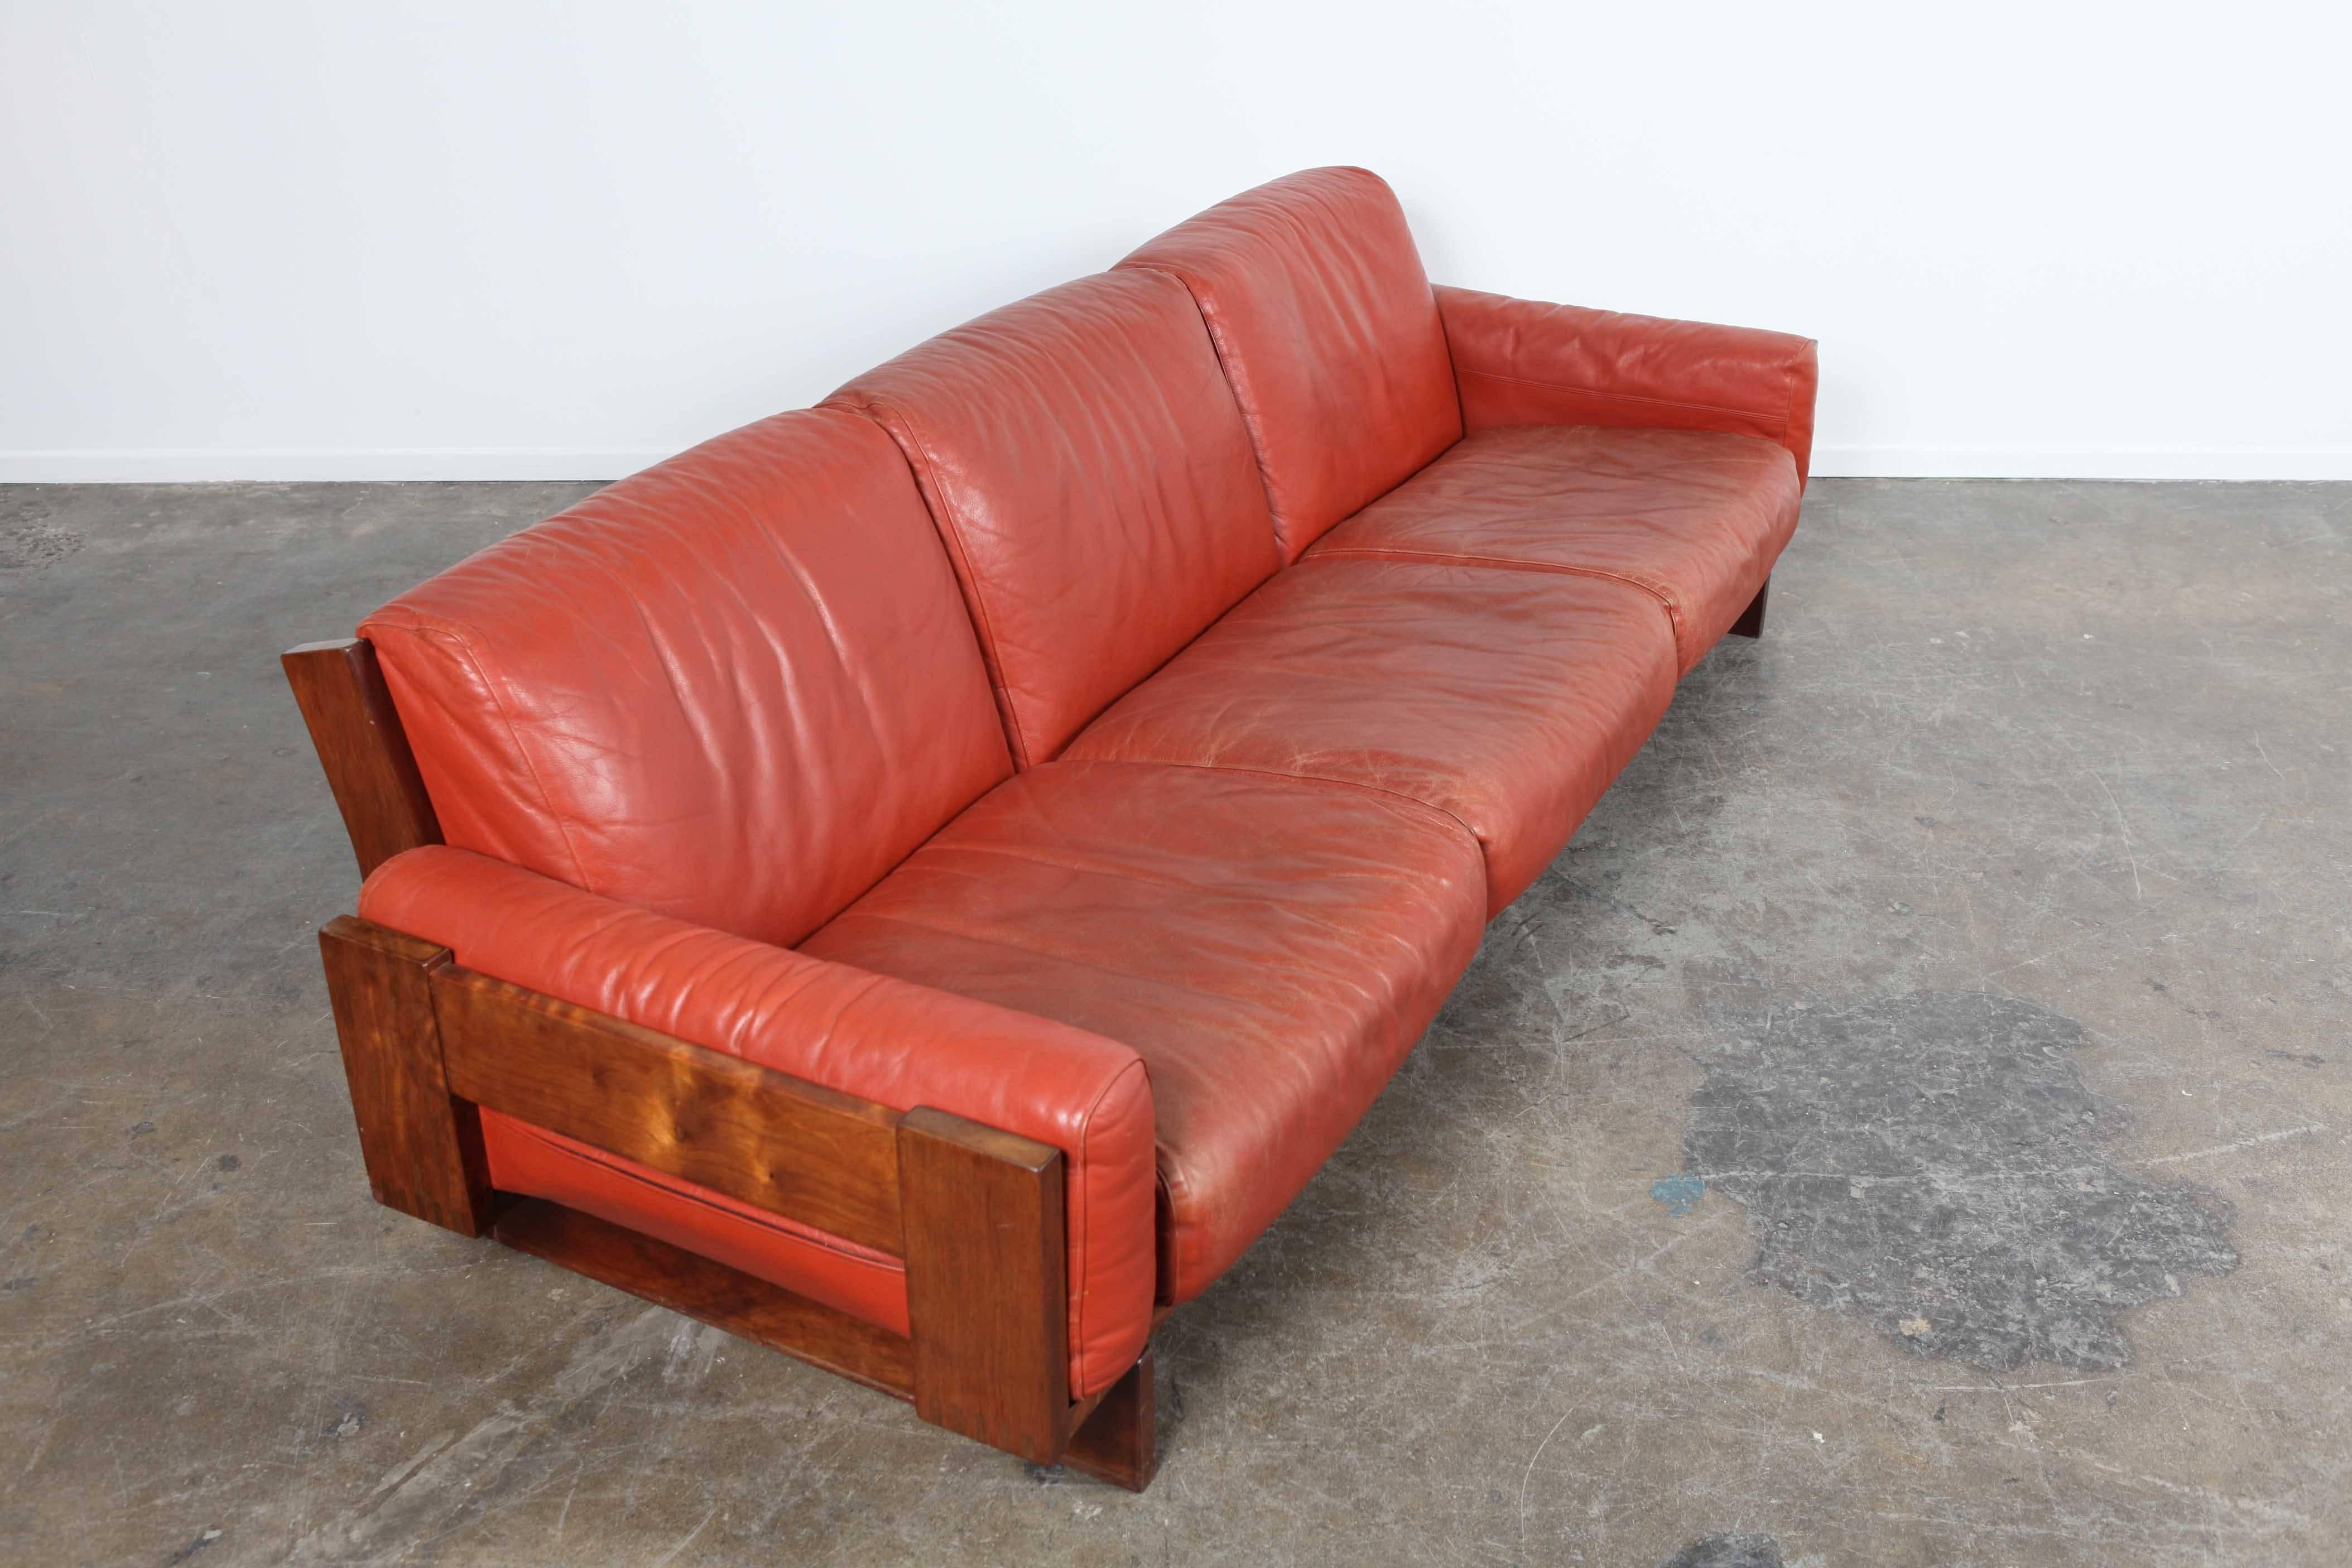 Red leather, three-seat sofa by Torbjørn Afdal of Norway.